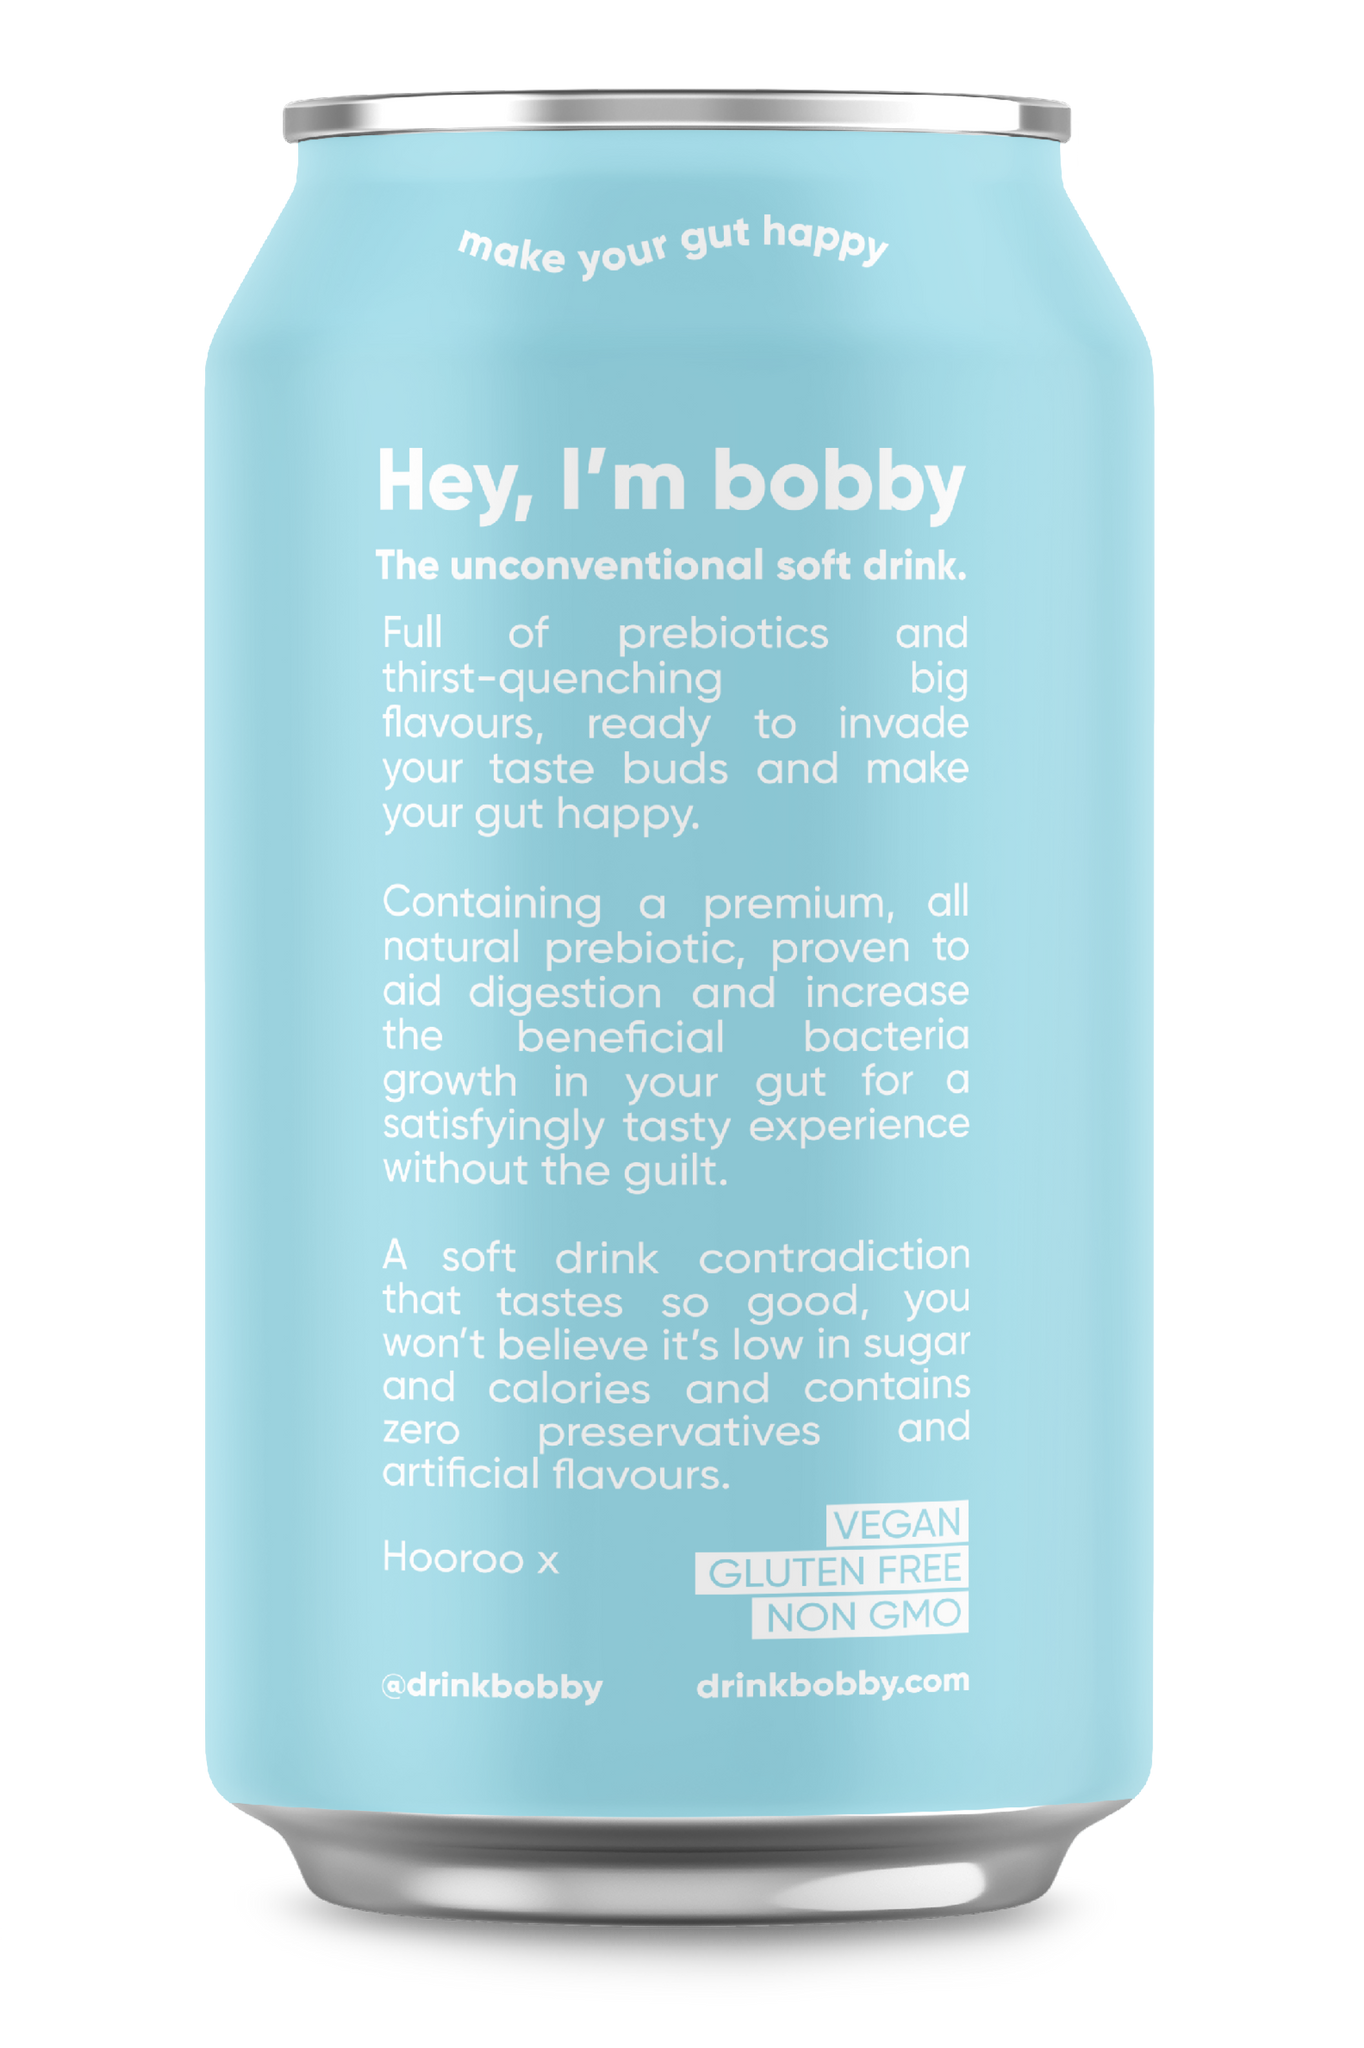 bobby soft drink blue can, blurb explaining the unconventional soft drink